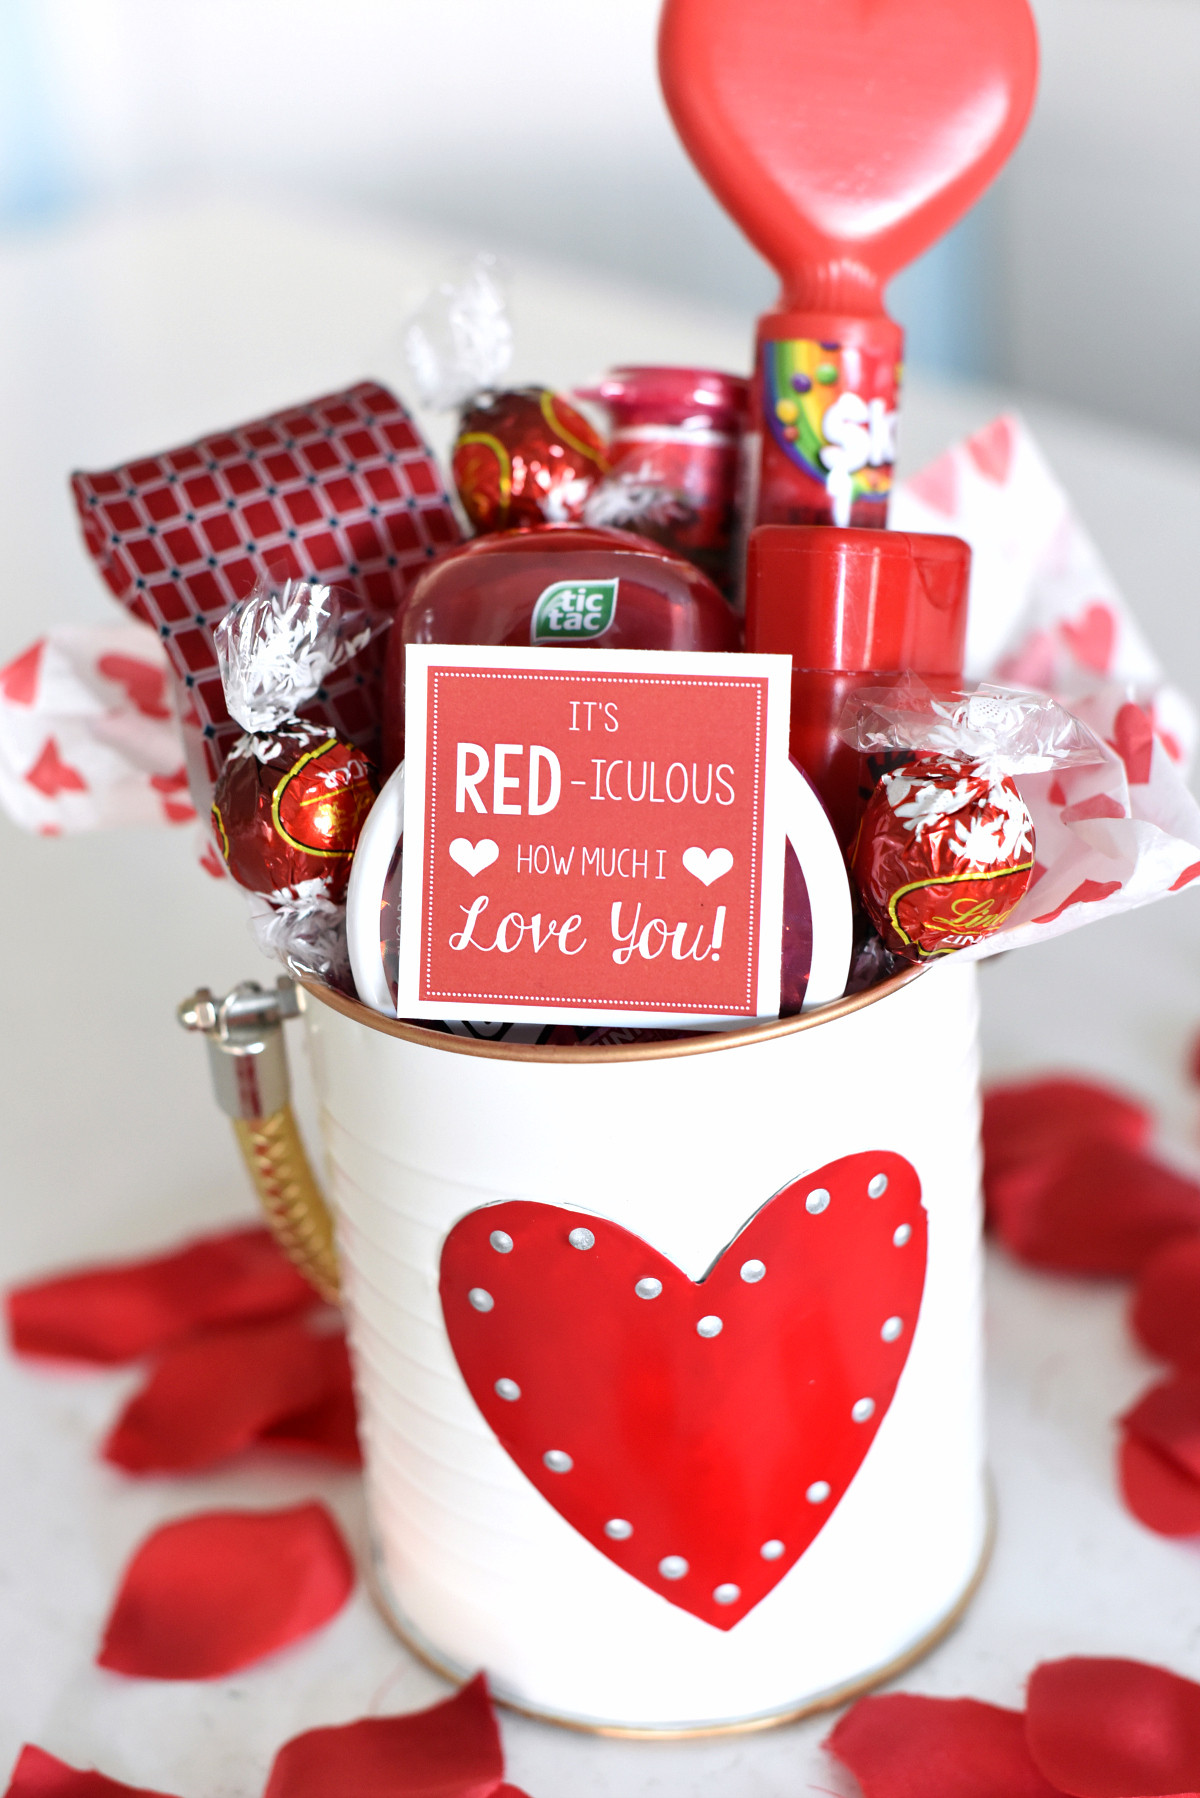 Valentines Day Gift Ideas for Teens Awesome 25 Diy Valentine S Day Gift Ideas Teens Will Love